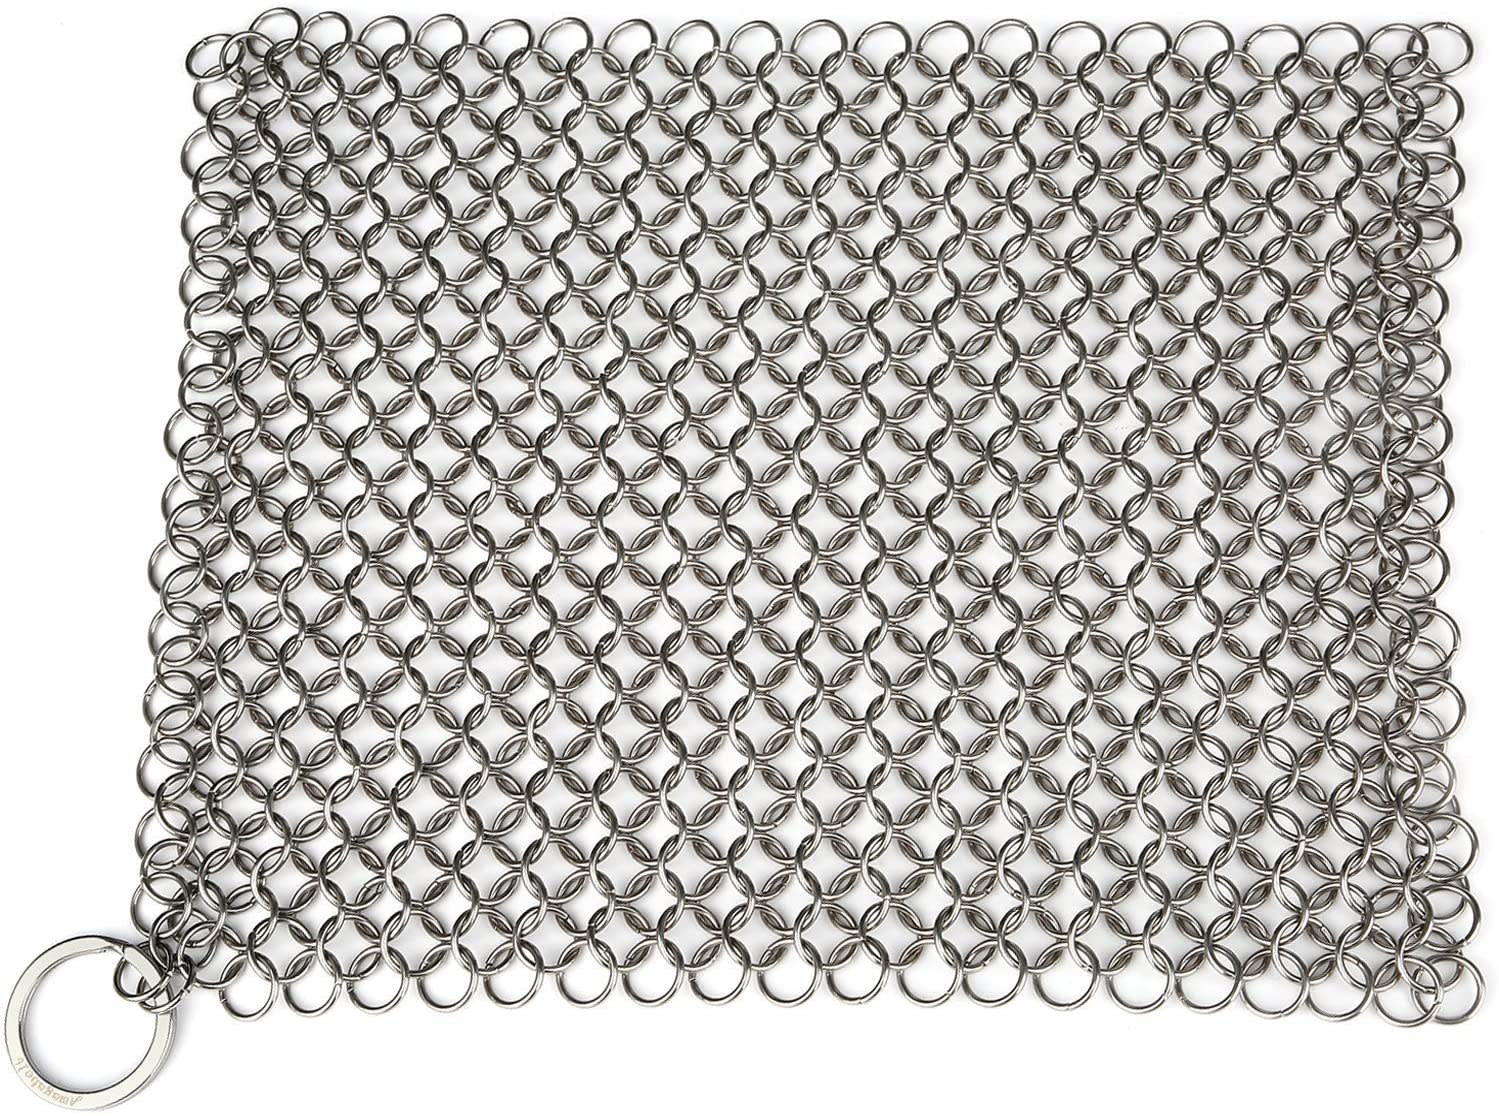 Cast Iron Cleaning Kit, 316 Stainless Steel Chainmail Scrubber, 2 Pan Grill Griddle Scrapers, Bamboo Fiber Rag, Sanding Sponge for Cast Iron Cleaner